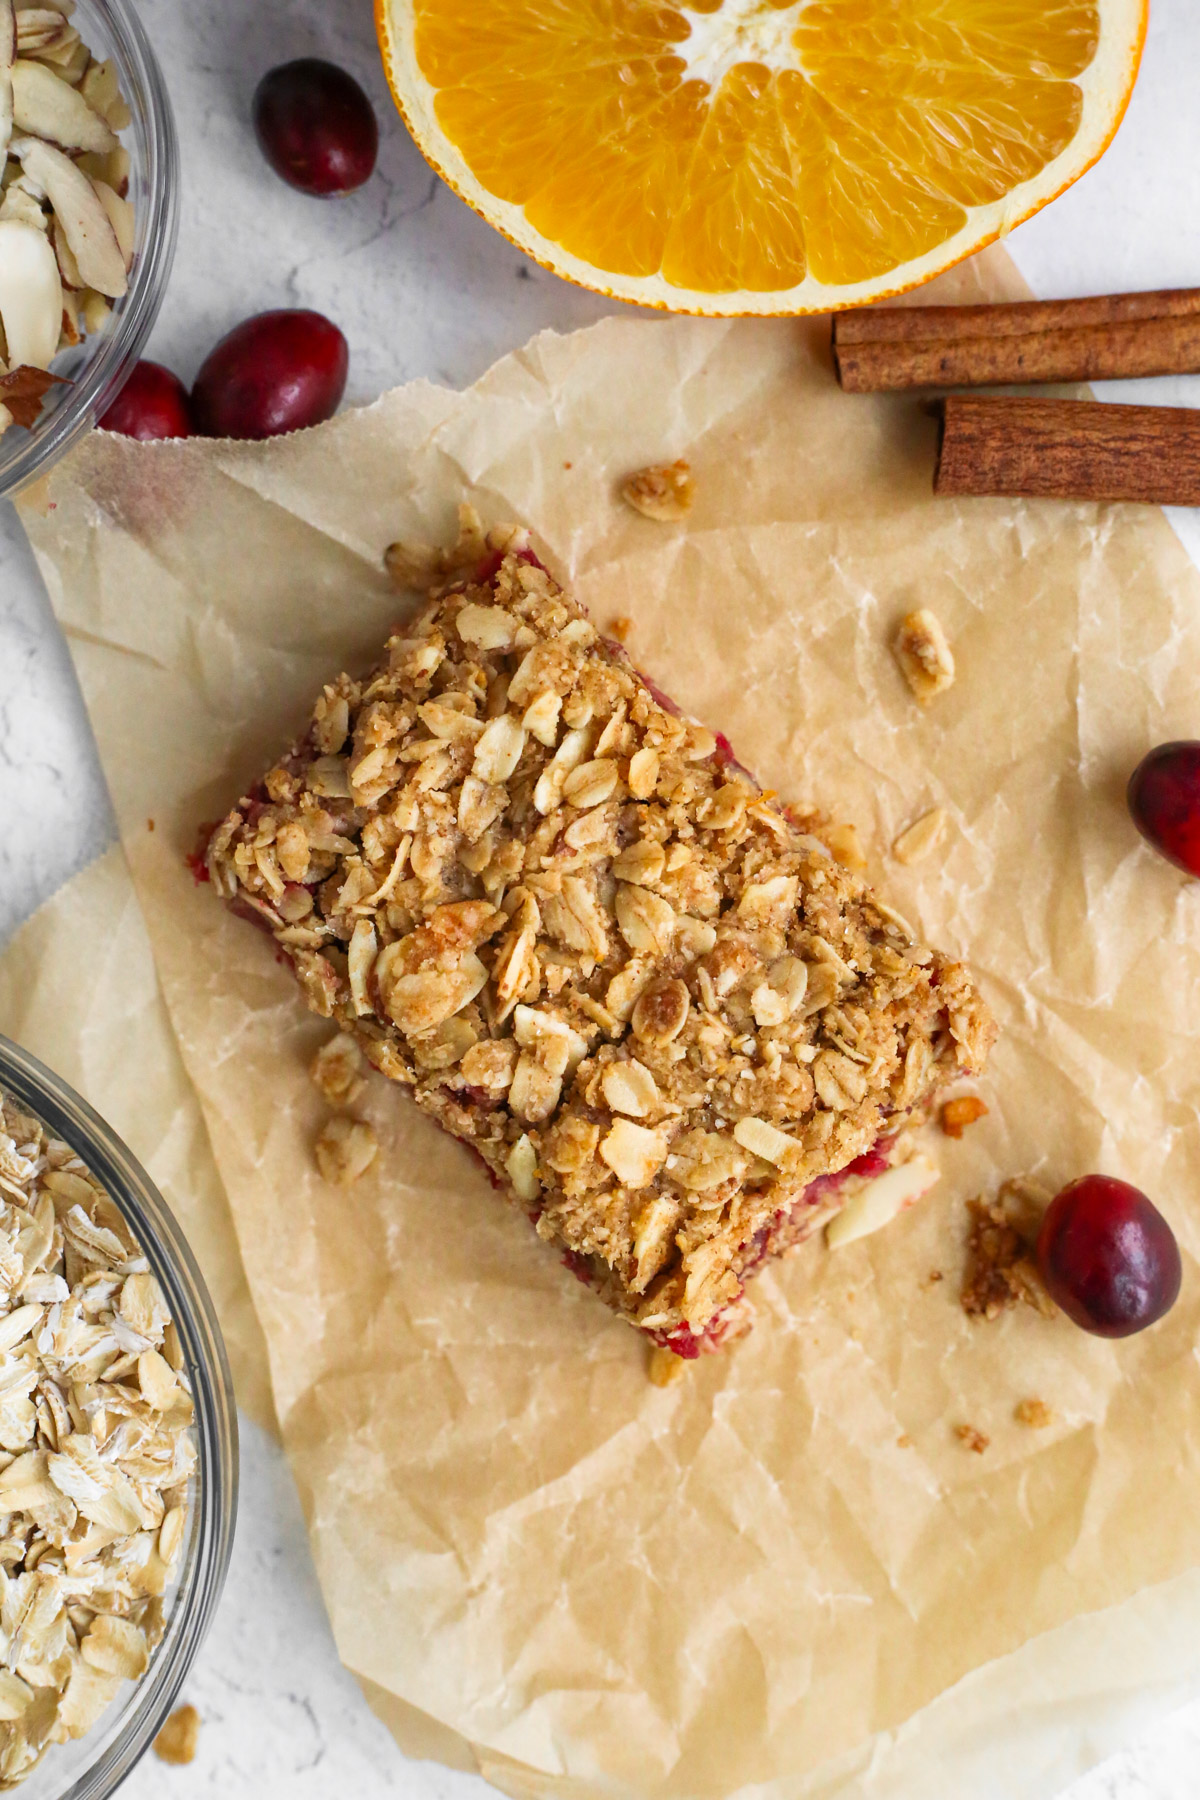 A single orange cranberry oat bar on parchment paper, surrounded by some of the other ingredients for the recipe